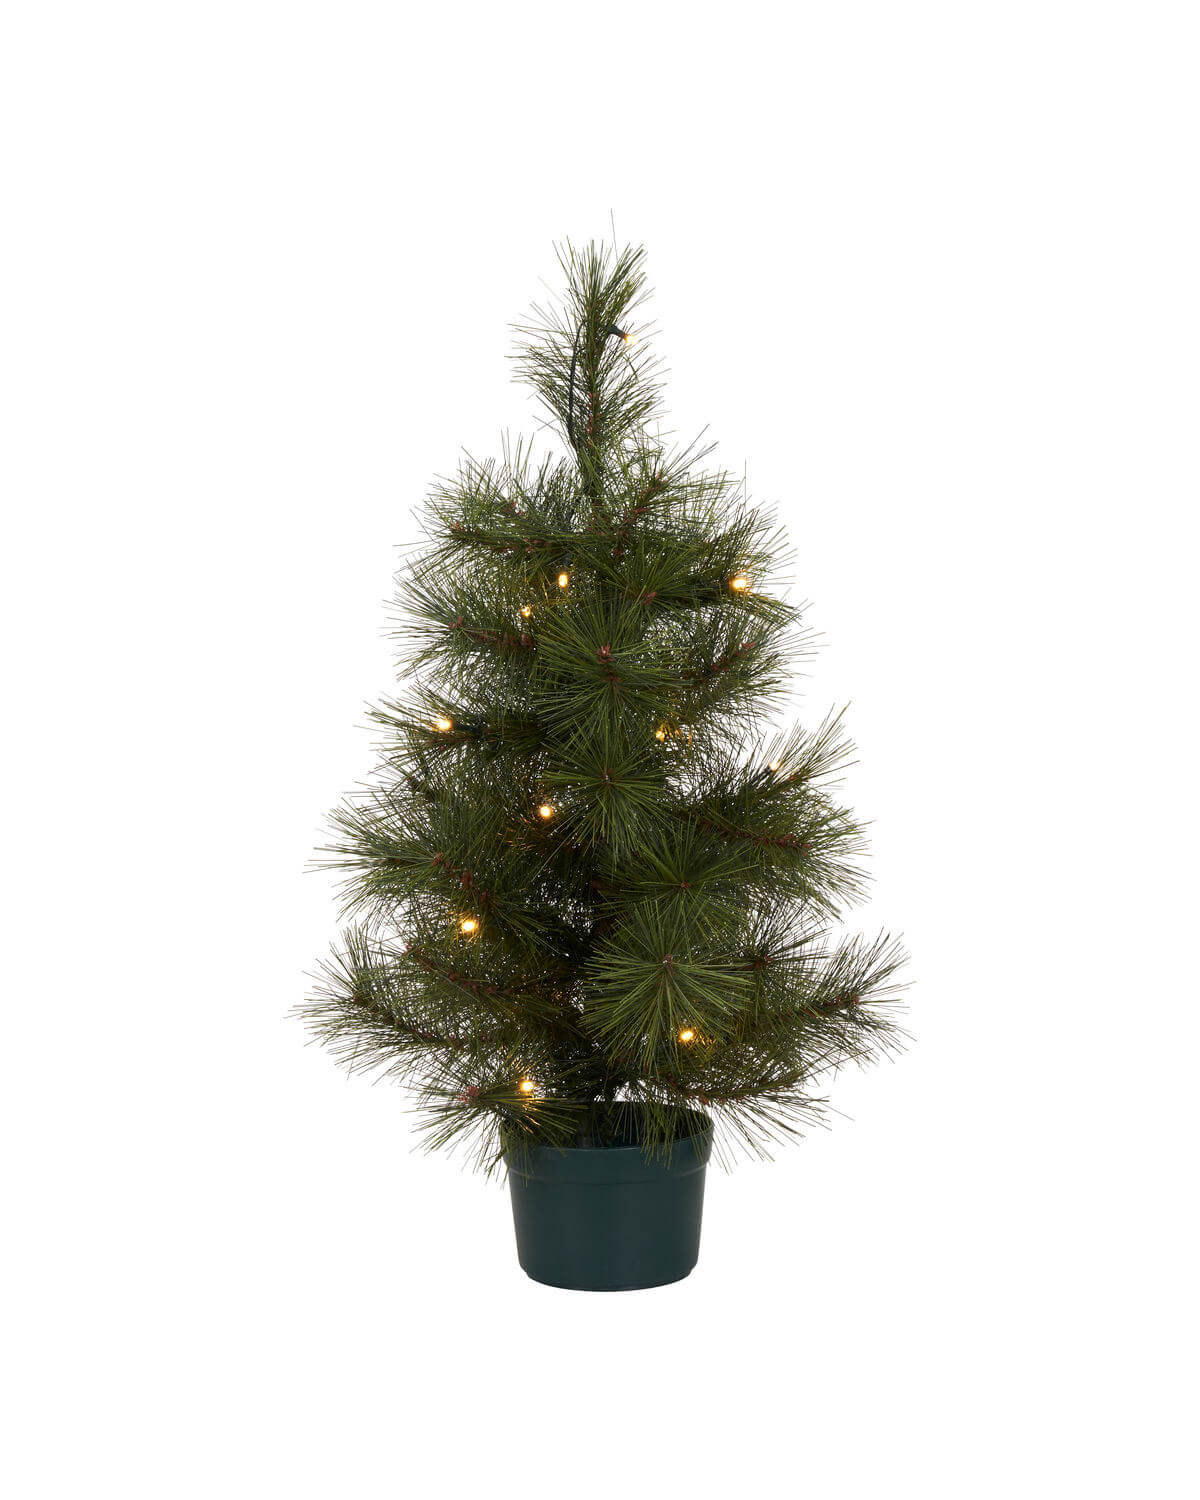 Pinus - Christmas Tree with LED Lights | 60cm | by House Doctor - Lifestory